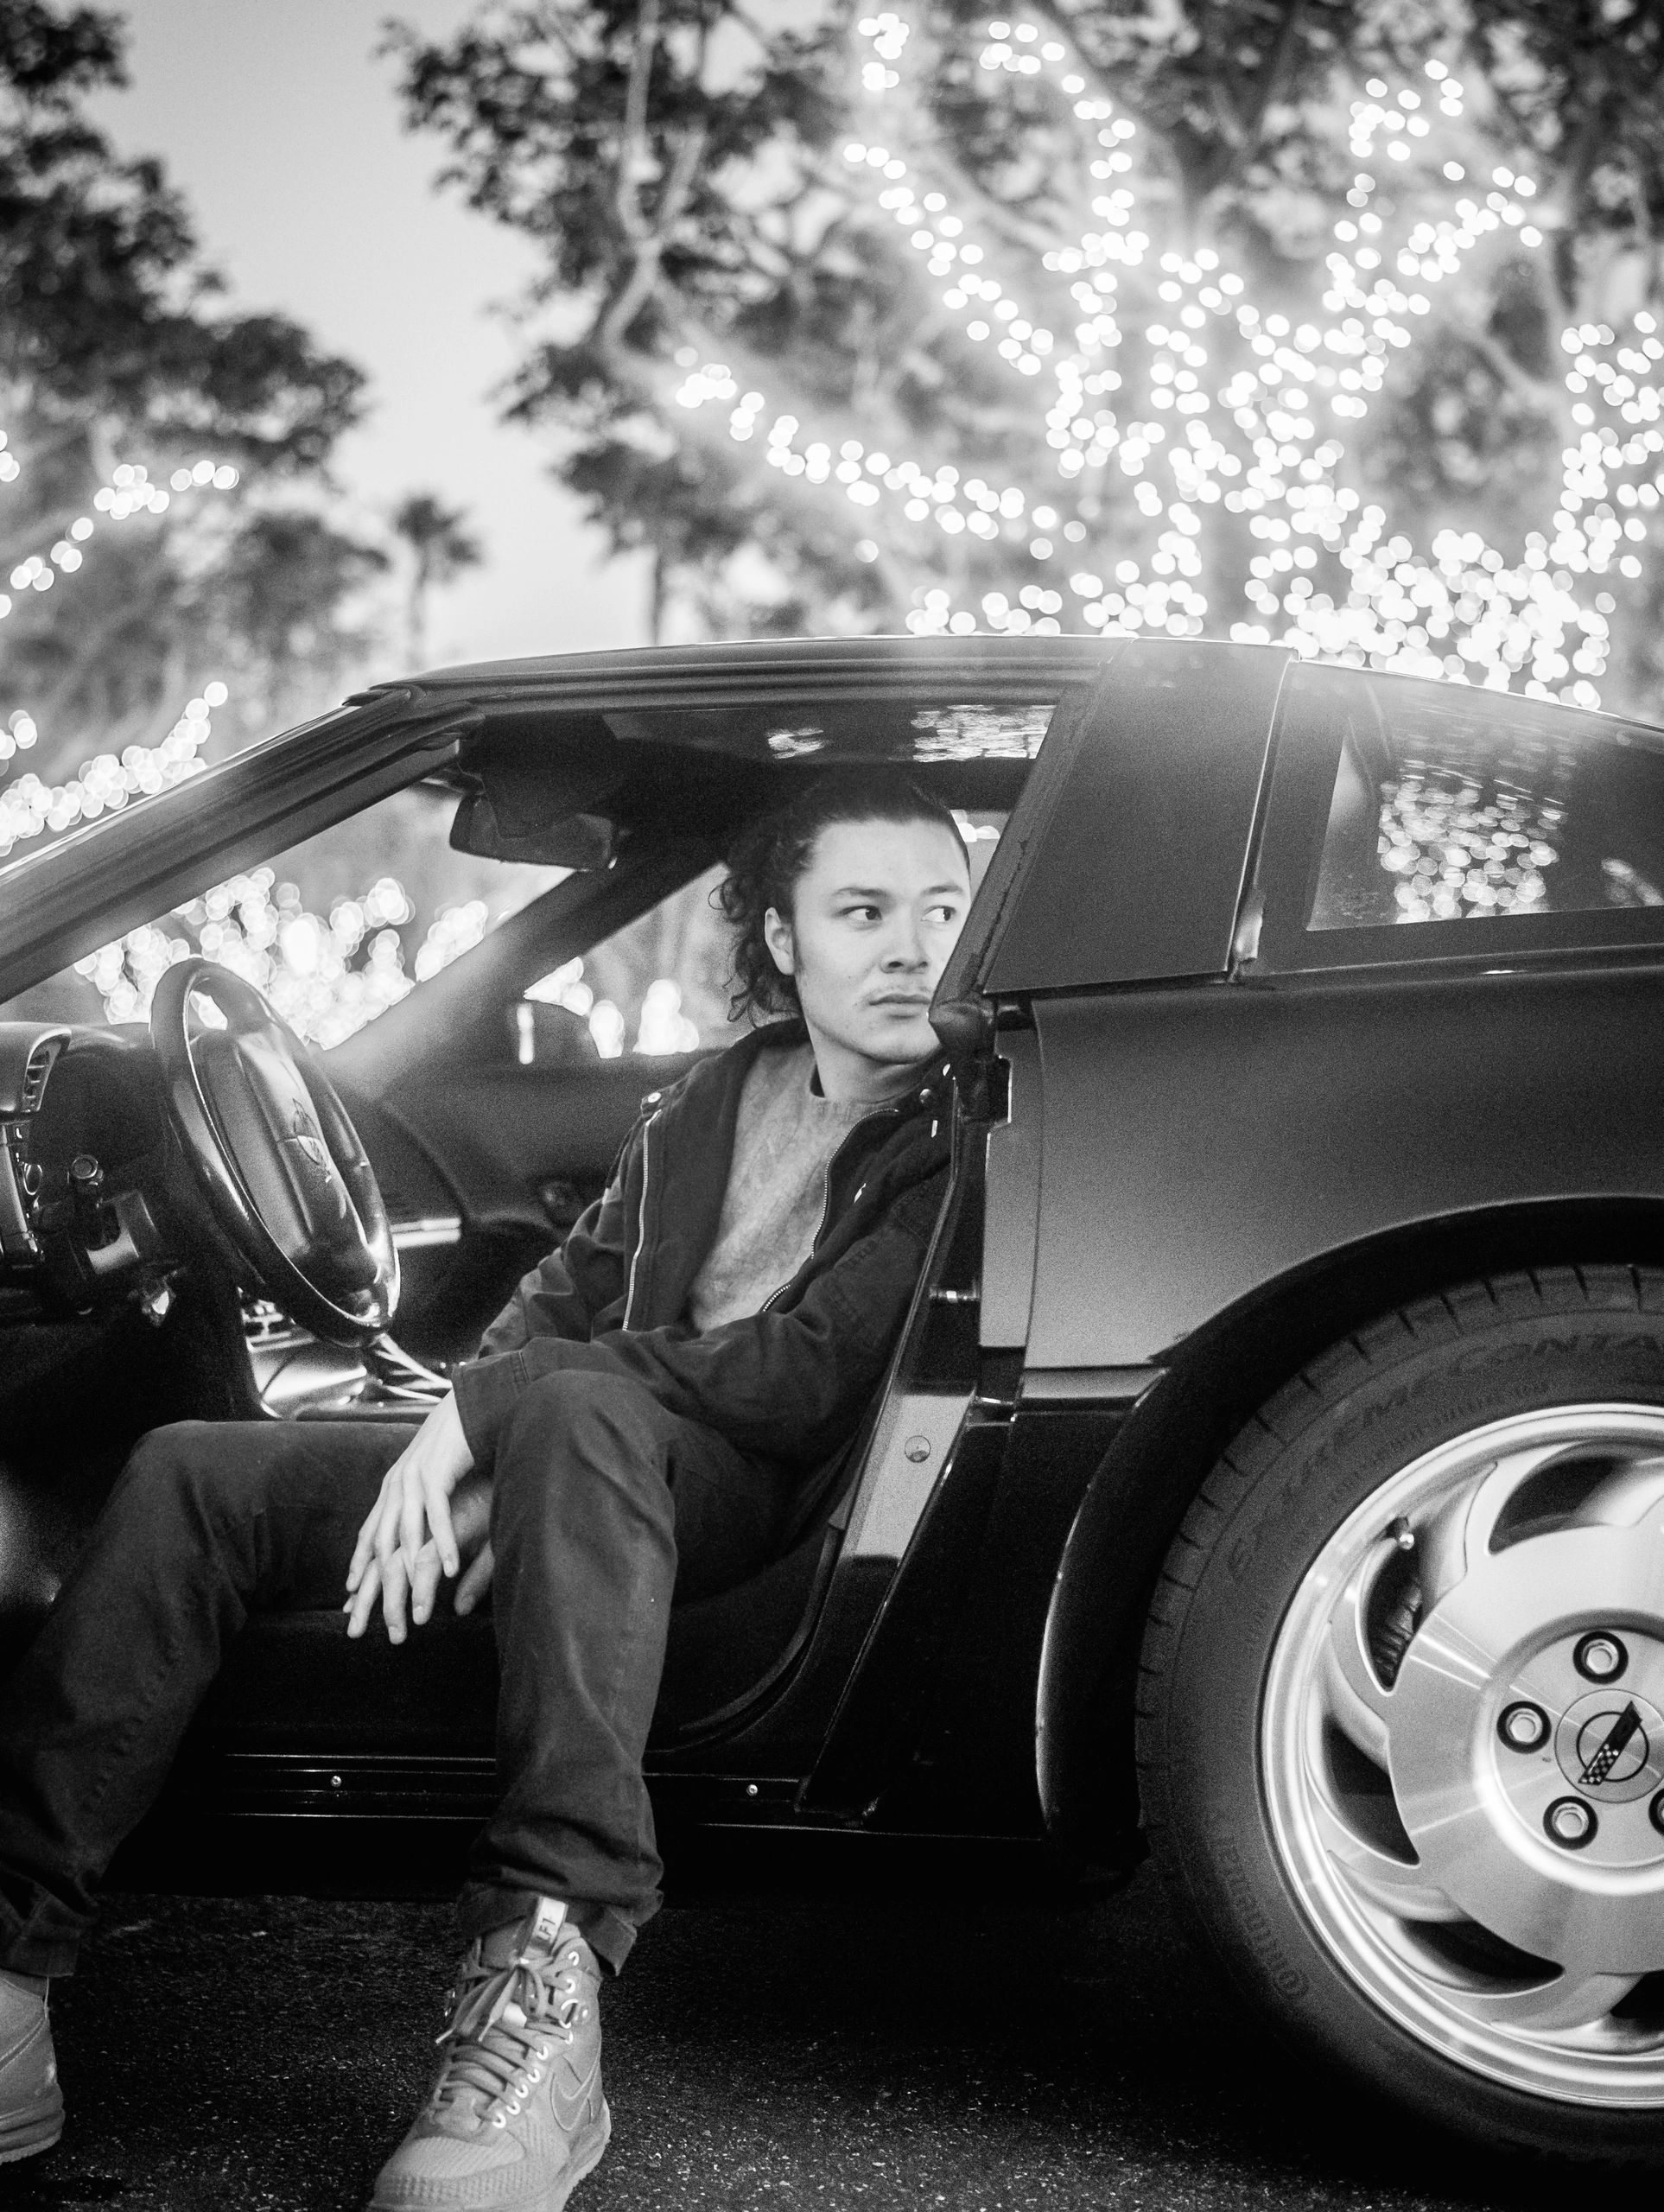 Male model sitting in his corvette with door open looking left black and white photo